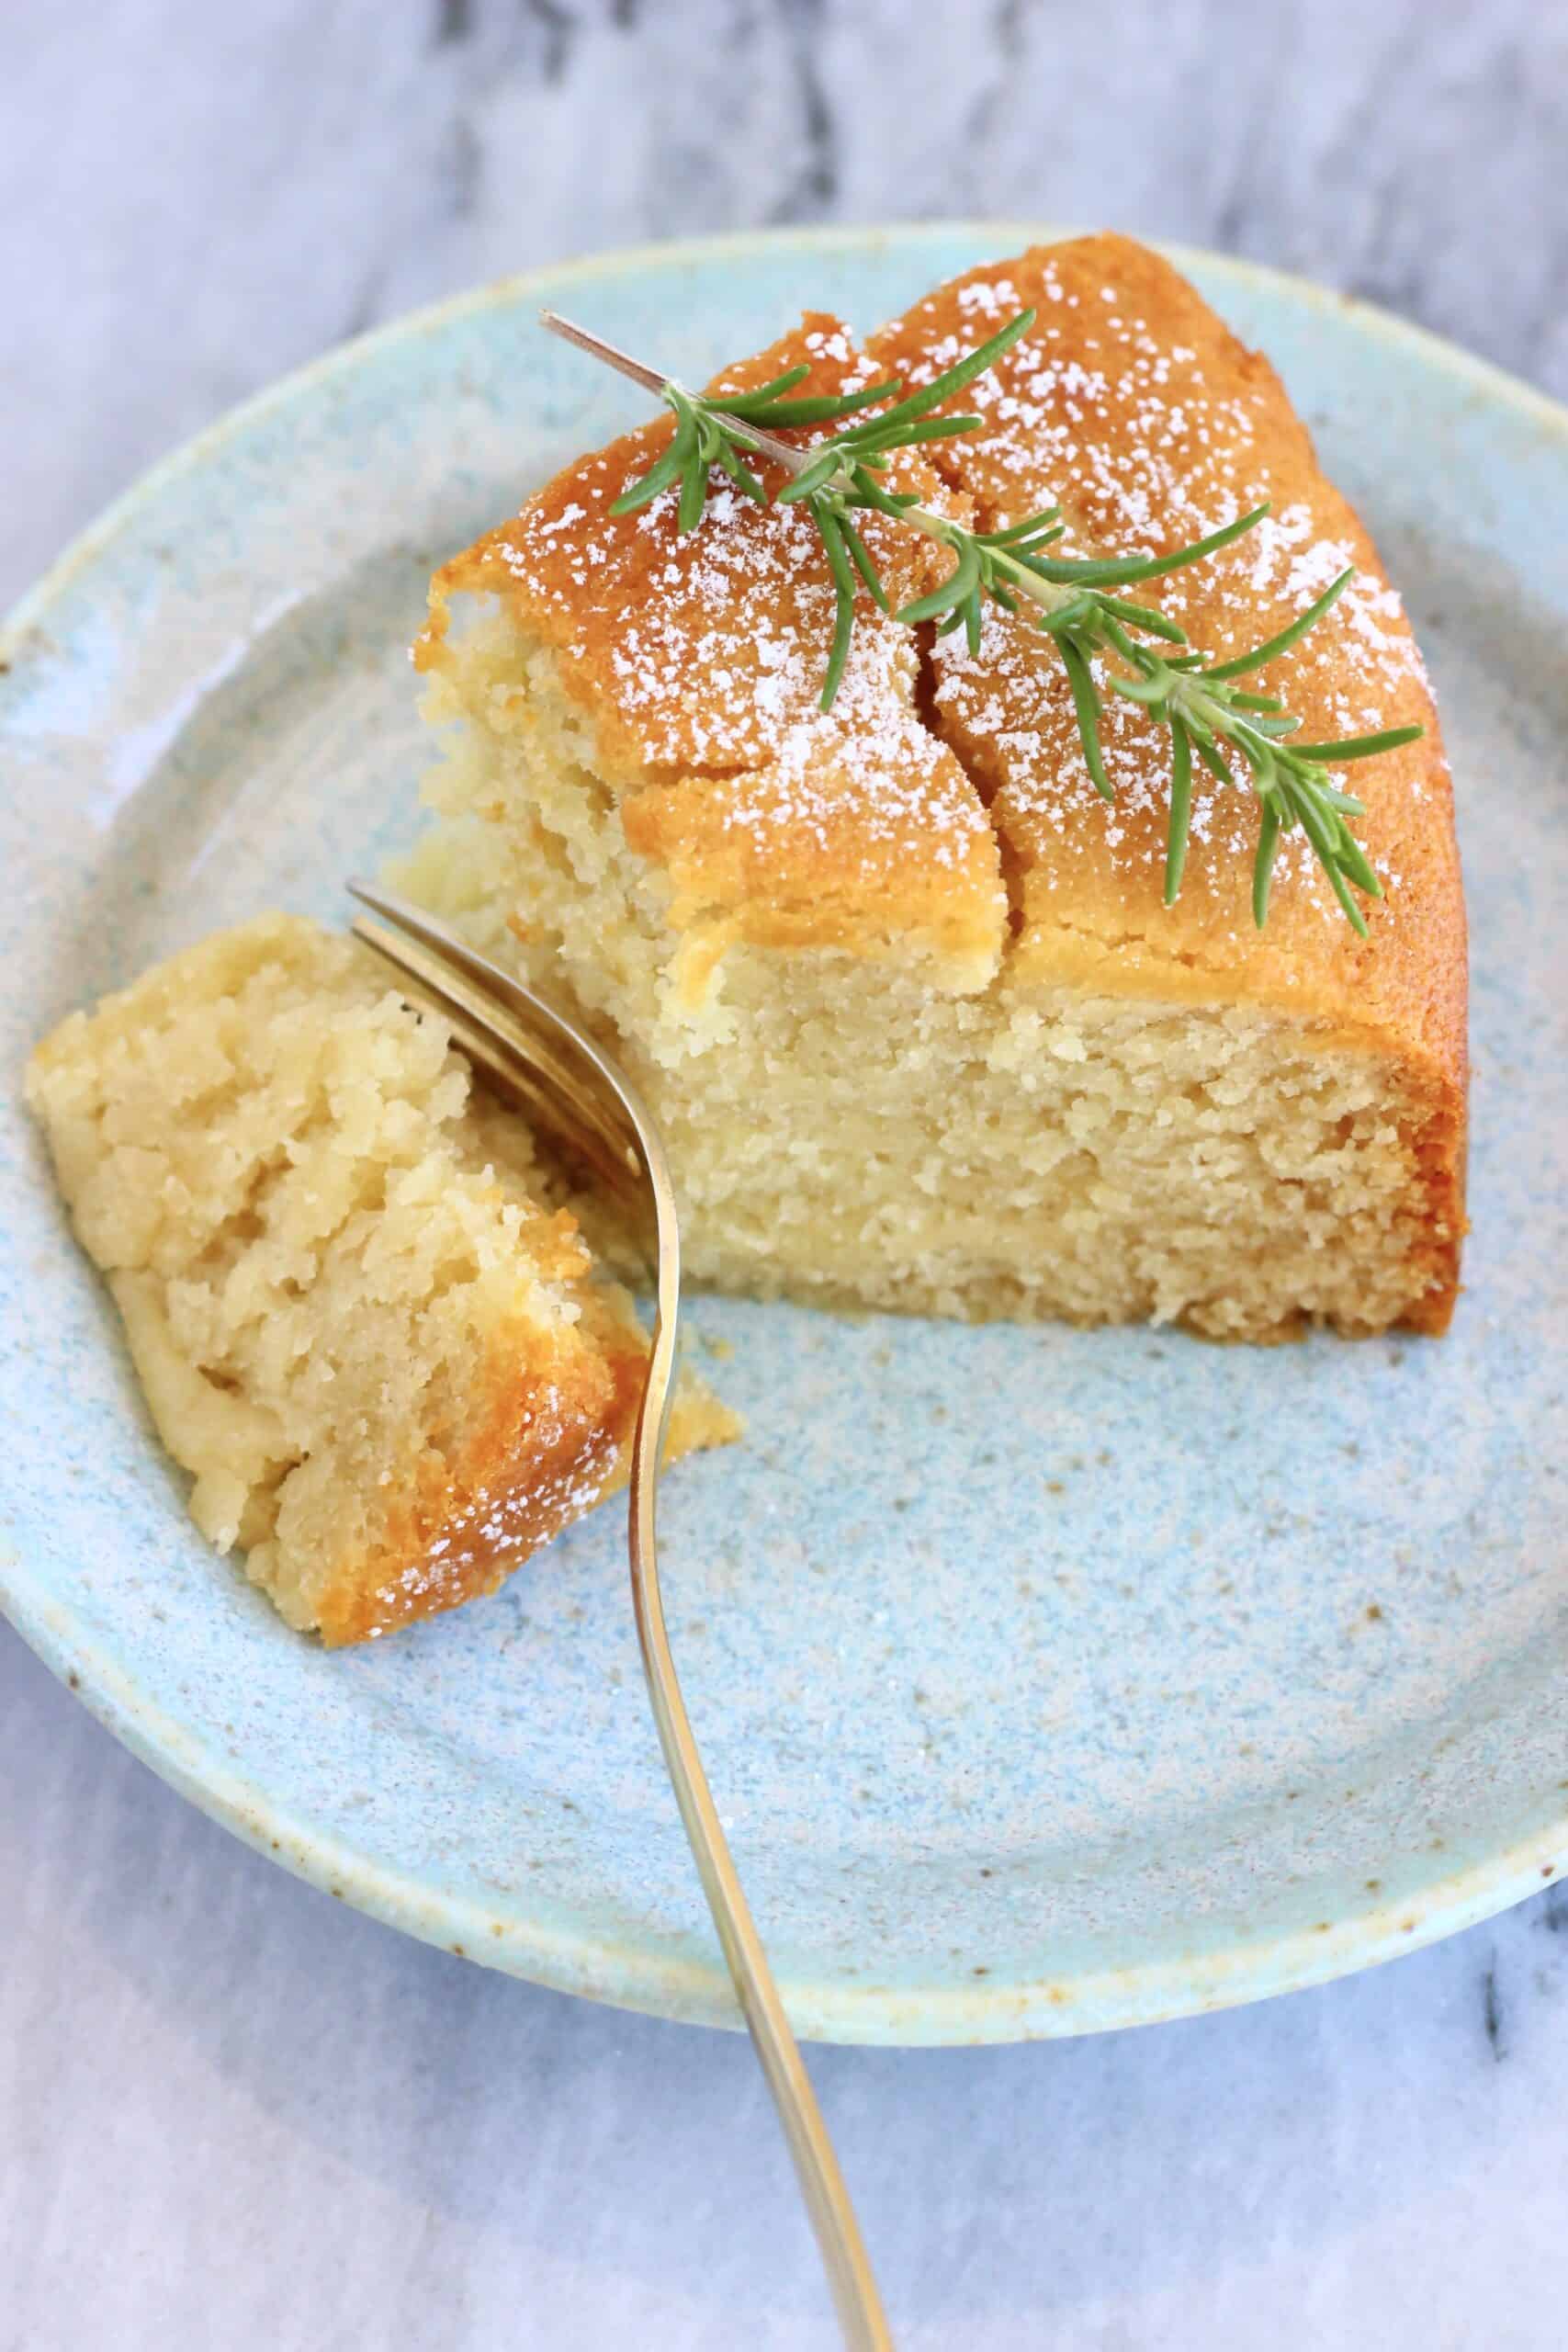 A slice of gluten-free vegan olive oil cake on a plate with a gold fork taking a bite out of it